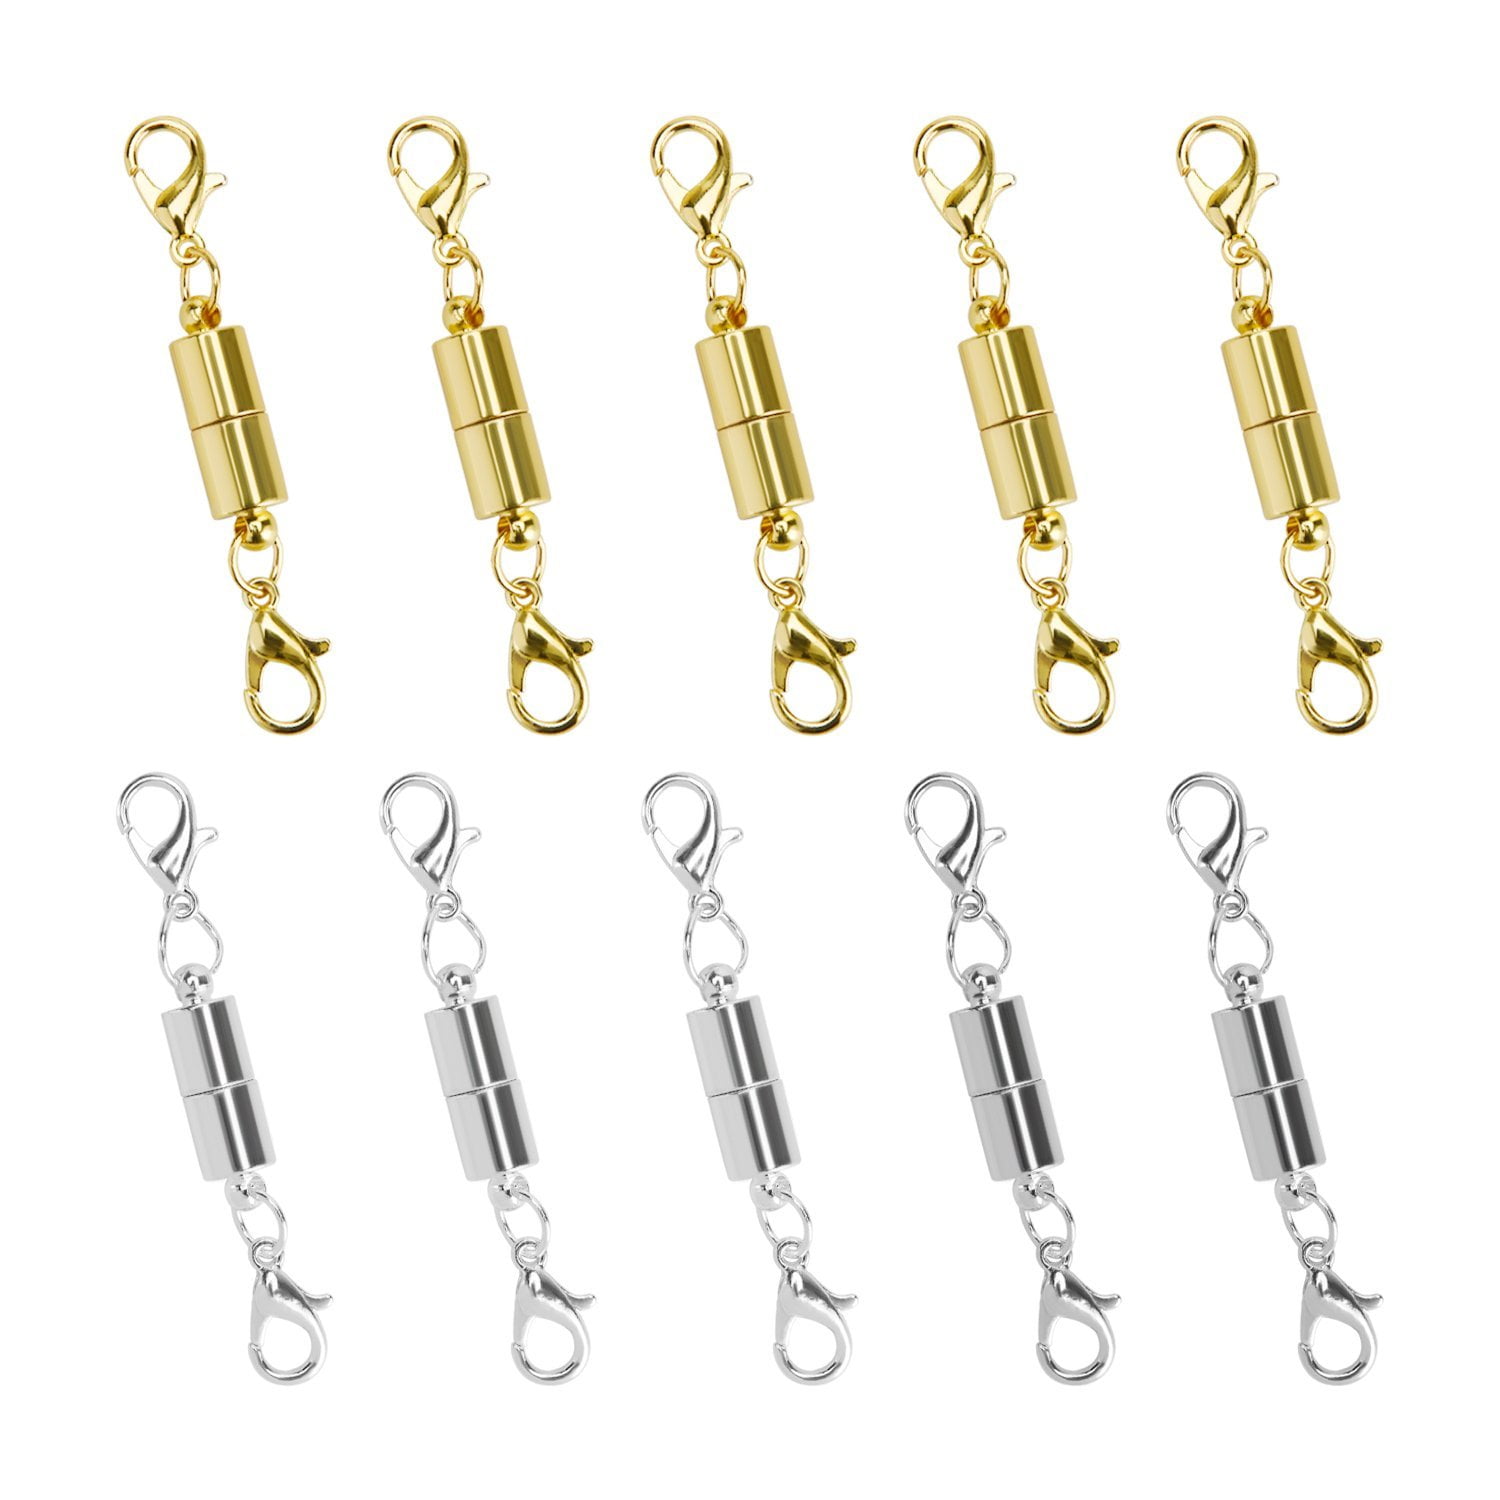 5 pcs Magnetic Silver Tone Brass Clasps Jewelry Fastener Closure Clasp #62